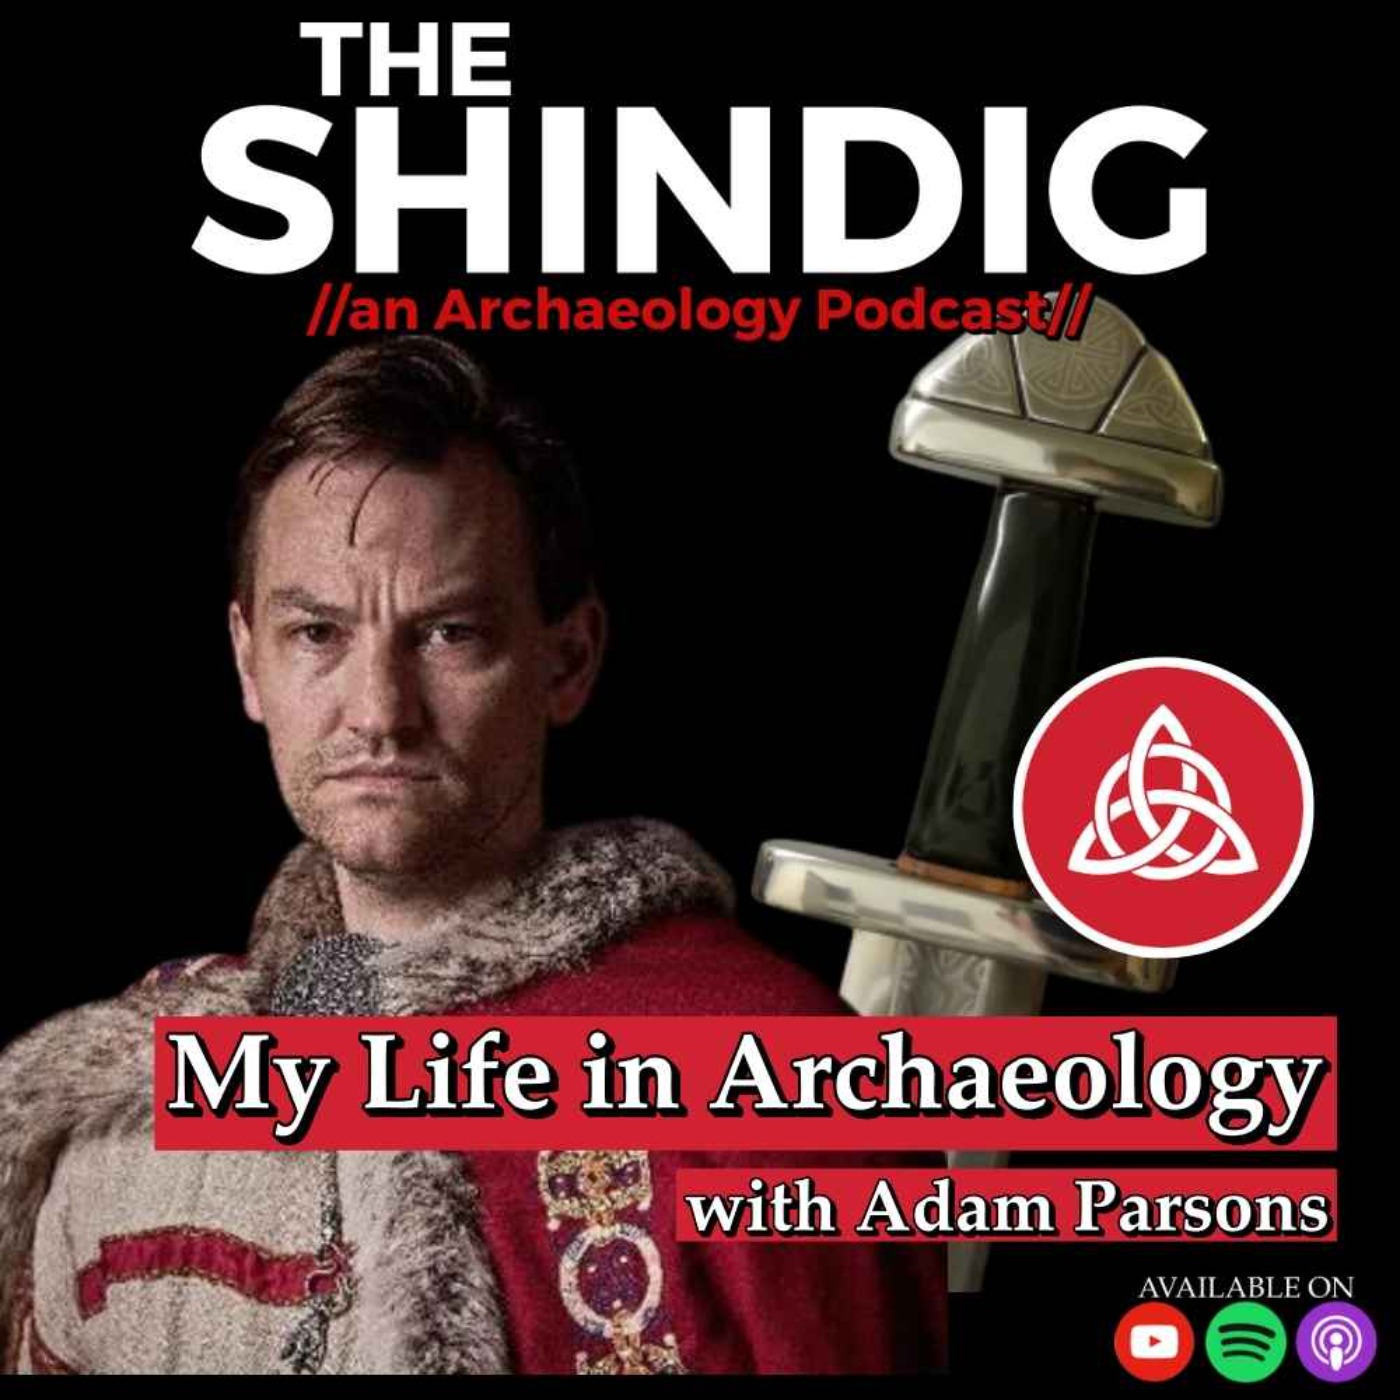 Adam Parsons – My Life in Archaeology